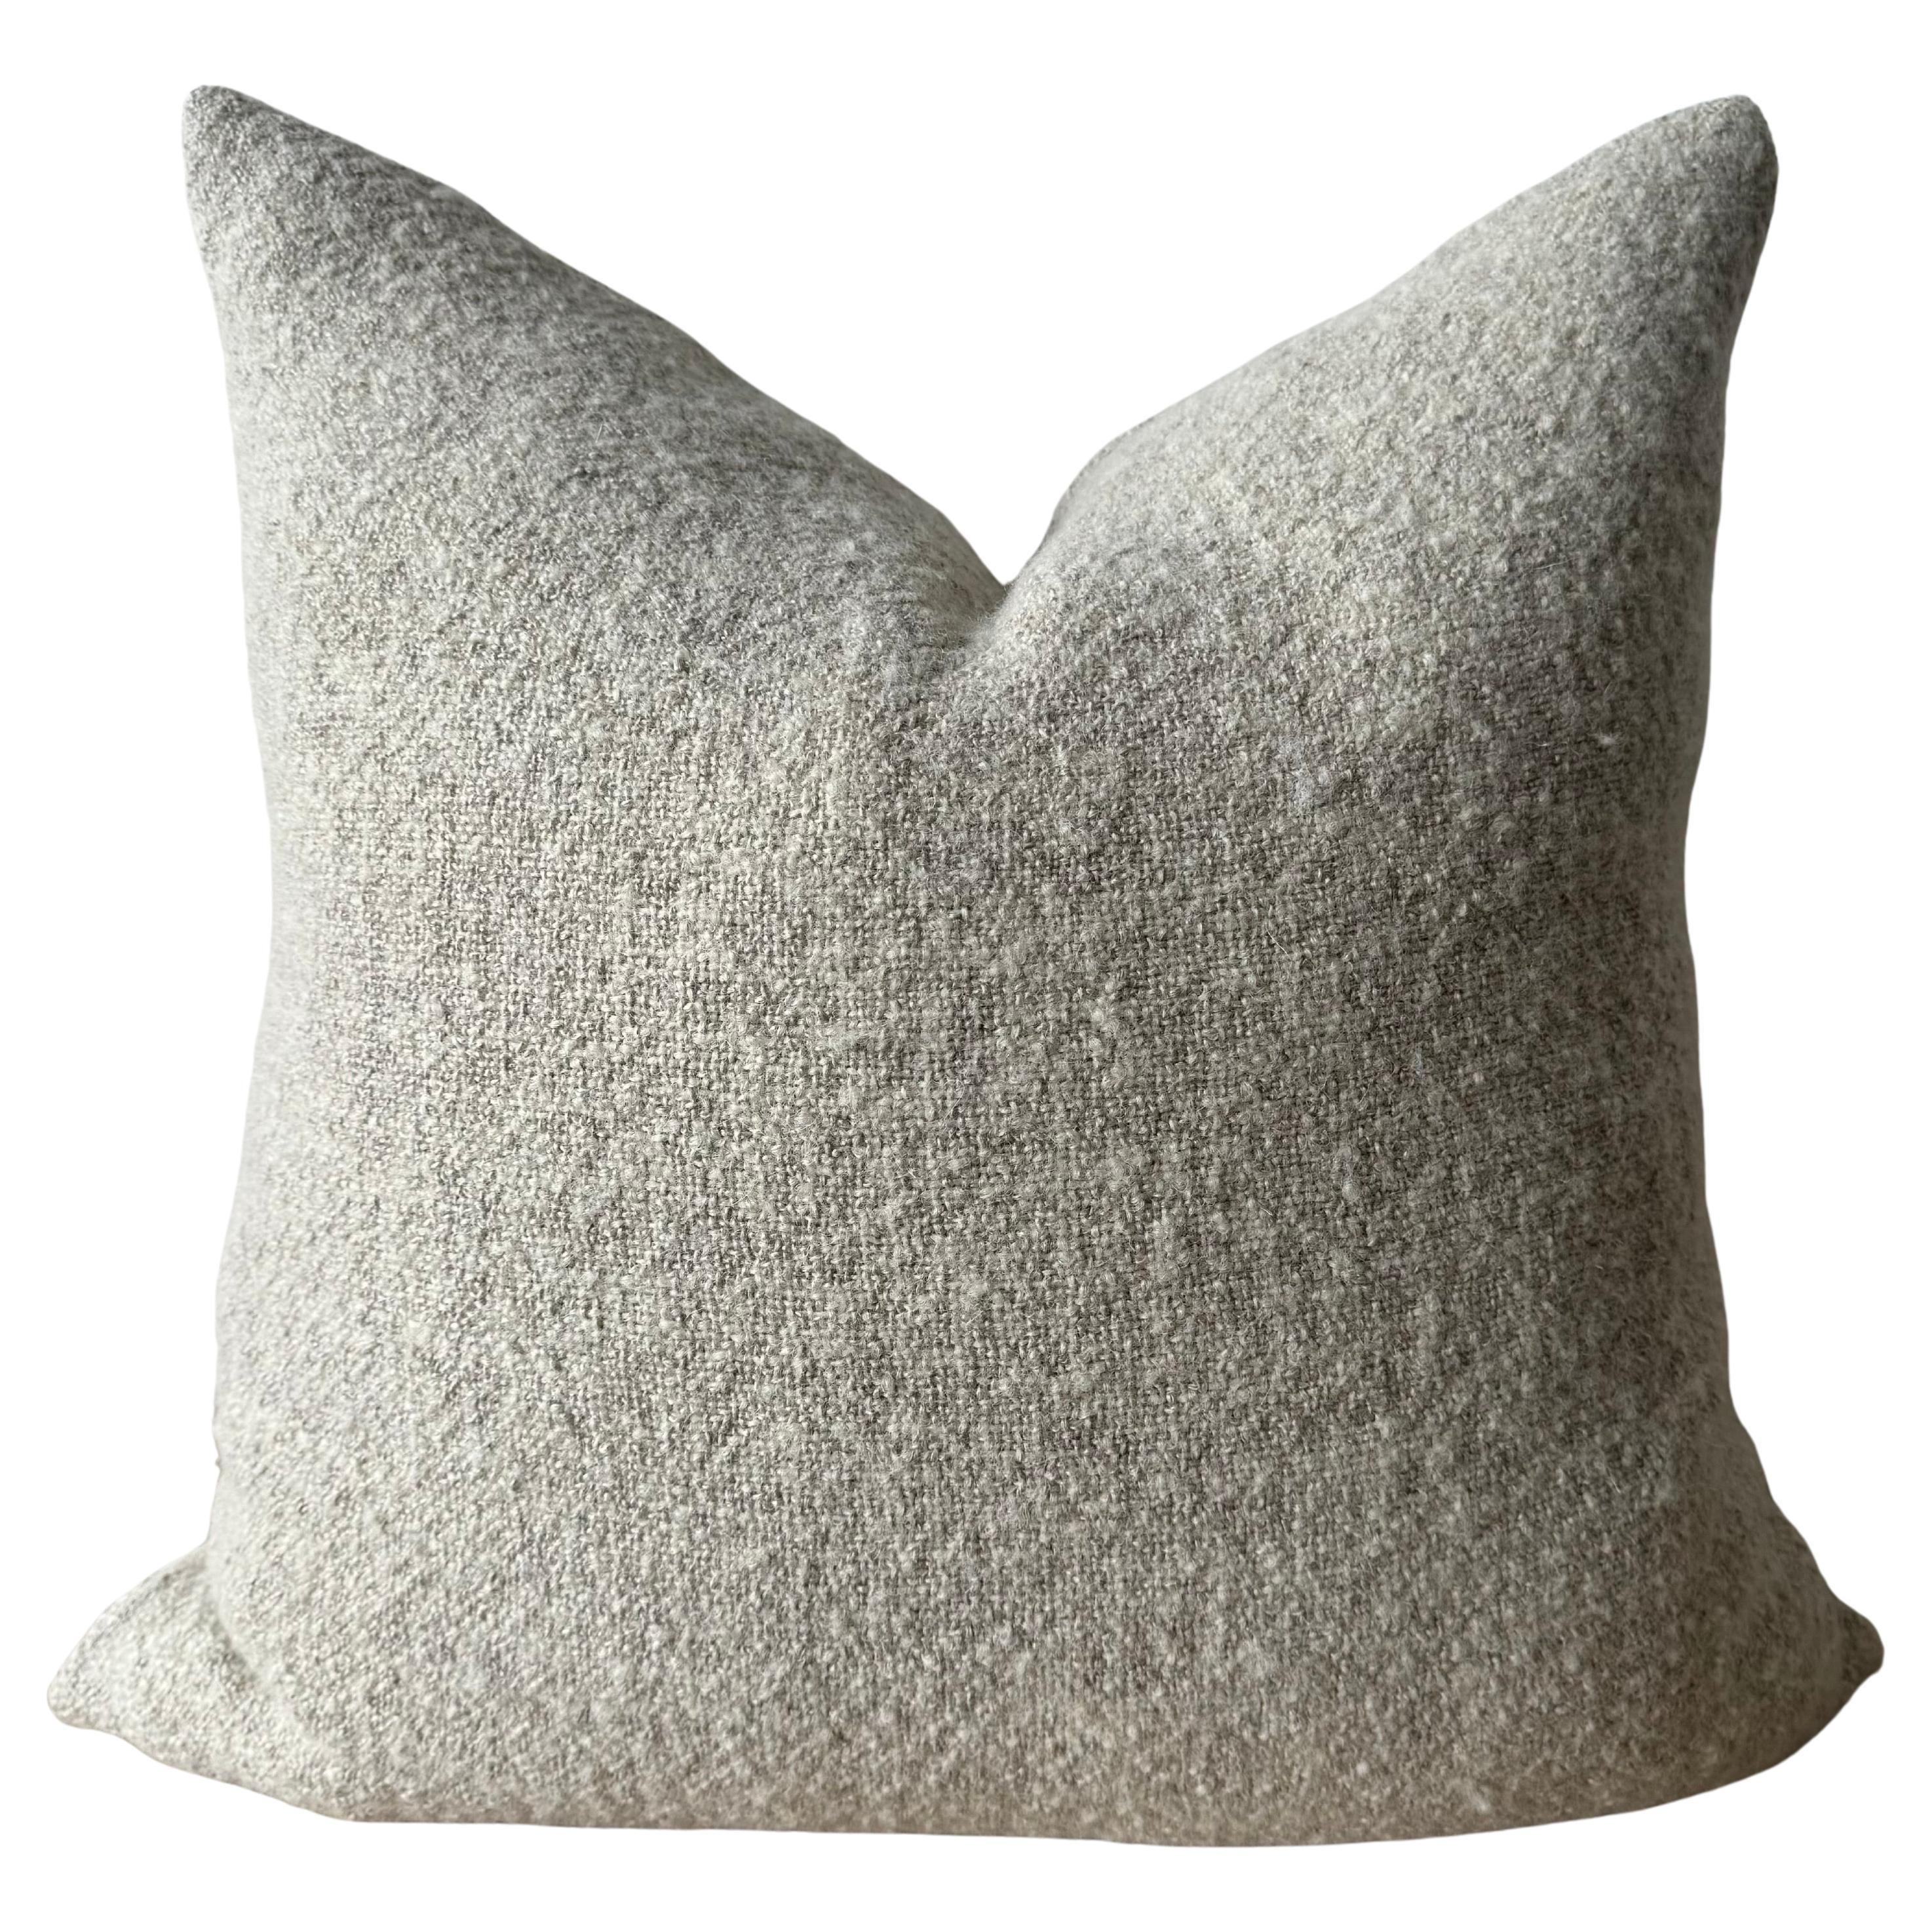 Custom Linen and Wool Pillow in Flax with Down Feather Insert For Sale